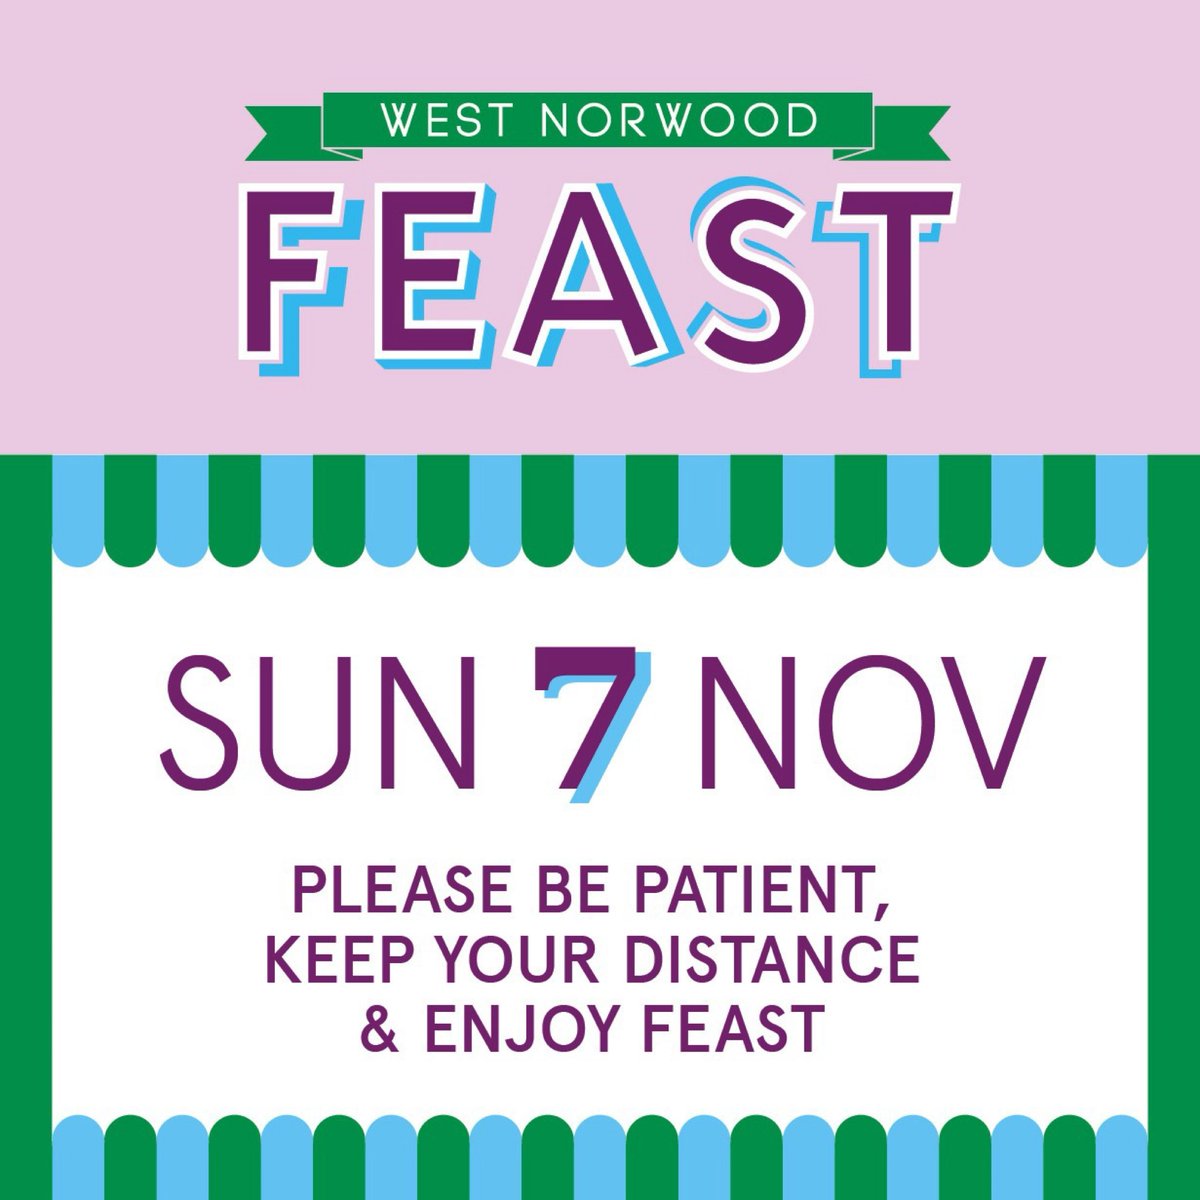 Feast coming up this Sunday - there will be lots of fun stuff including firework-themed craft, music workshops & South London Theatre promoting their Xmas show. Plus all your favourite foodie, vintage & creative traders. #westnorwood #communitystall westnorwoodfeast.com/sunday-7-novem…